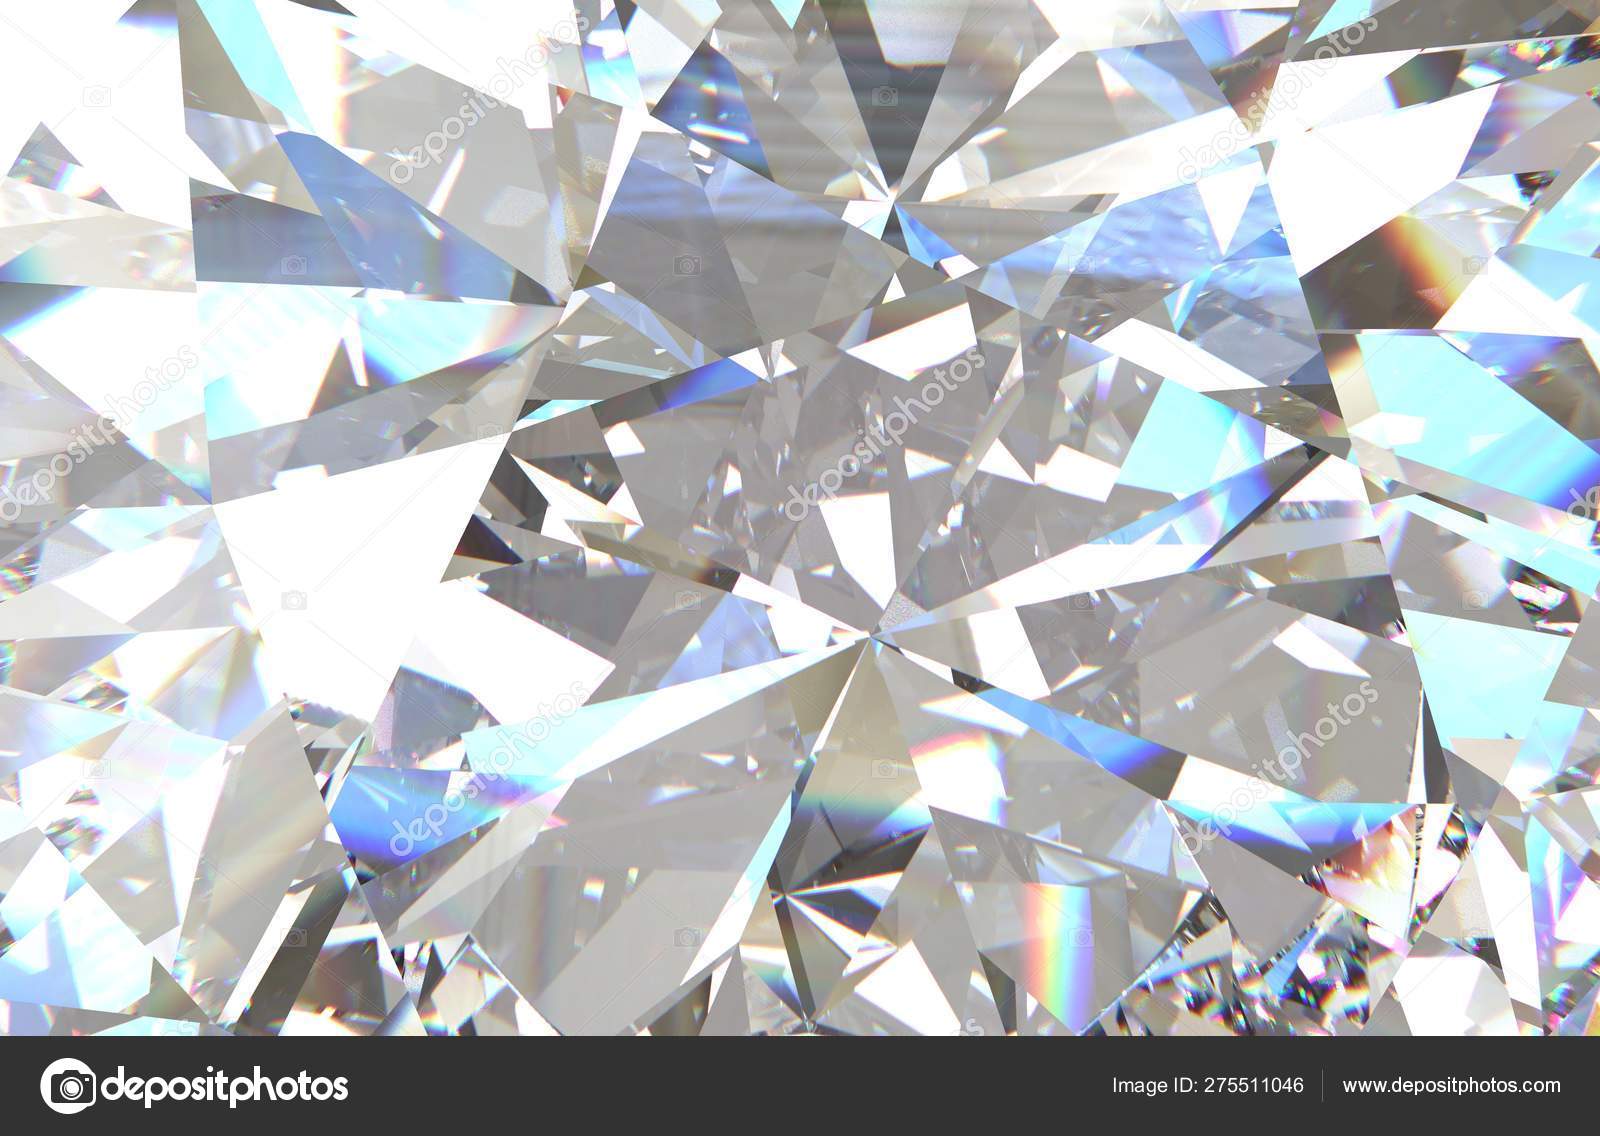 Layered texture triangular diamond or crystal shapes background. 3d  rendering model Stock Photo by © 275511046